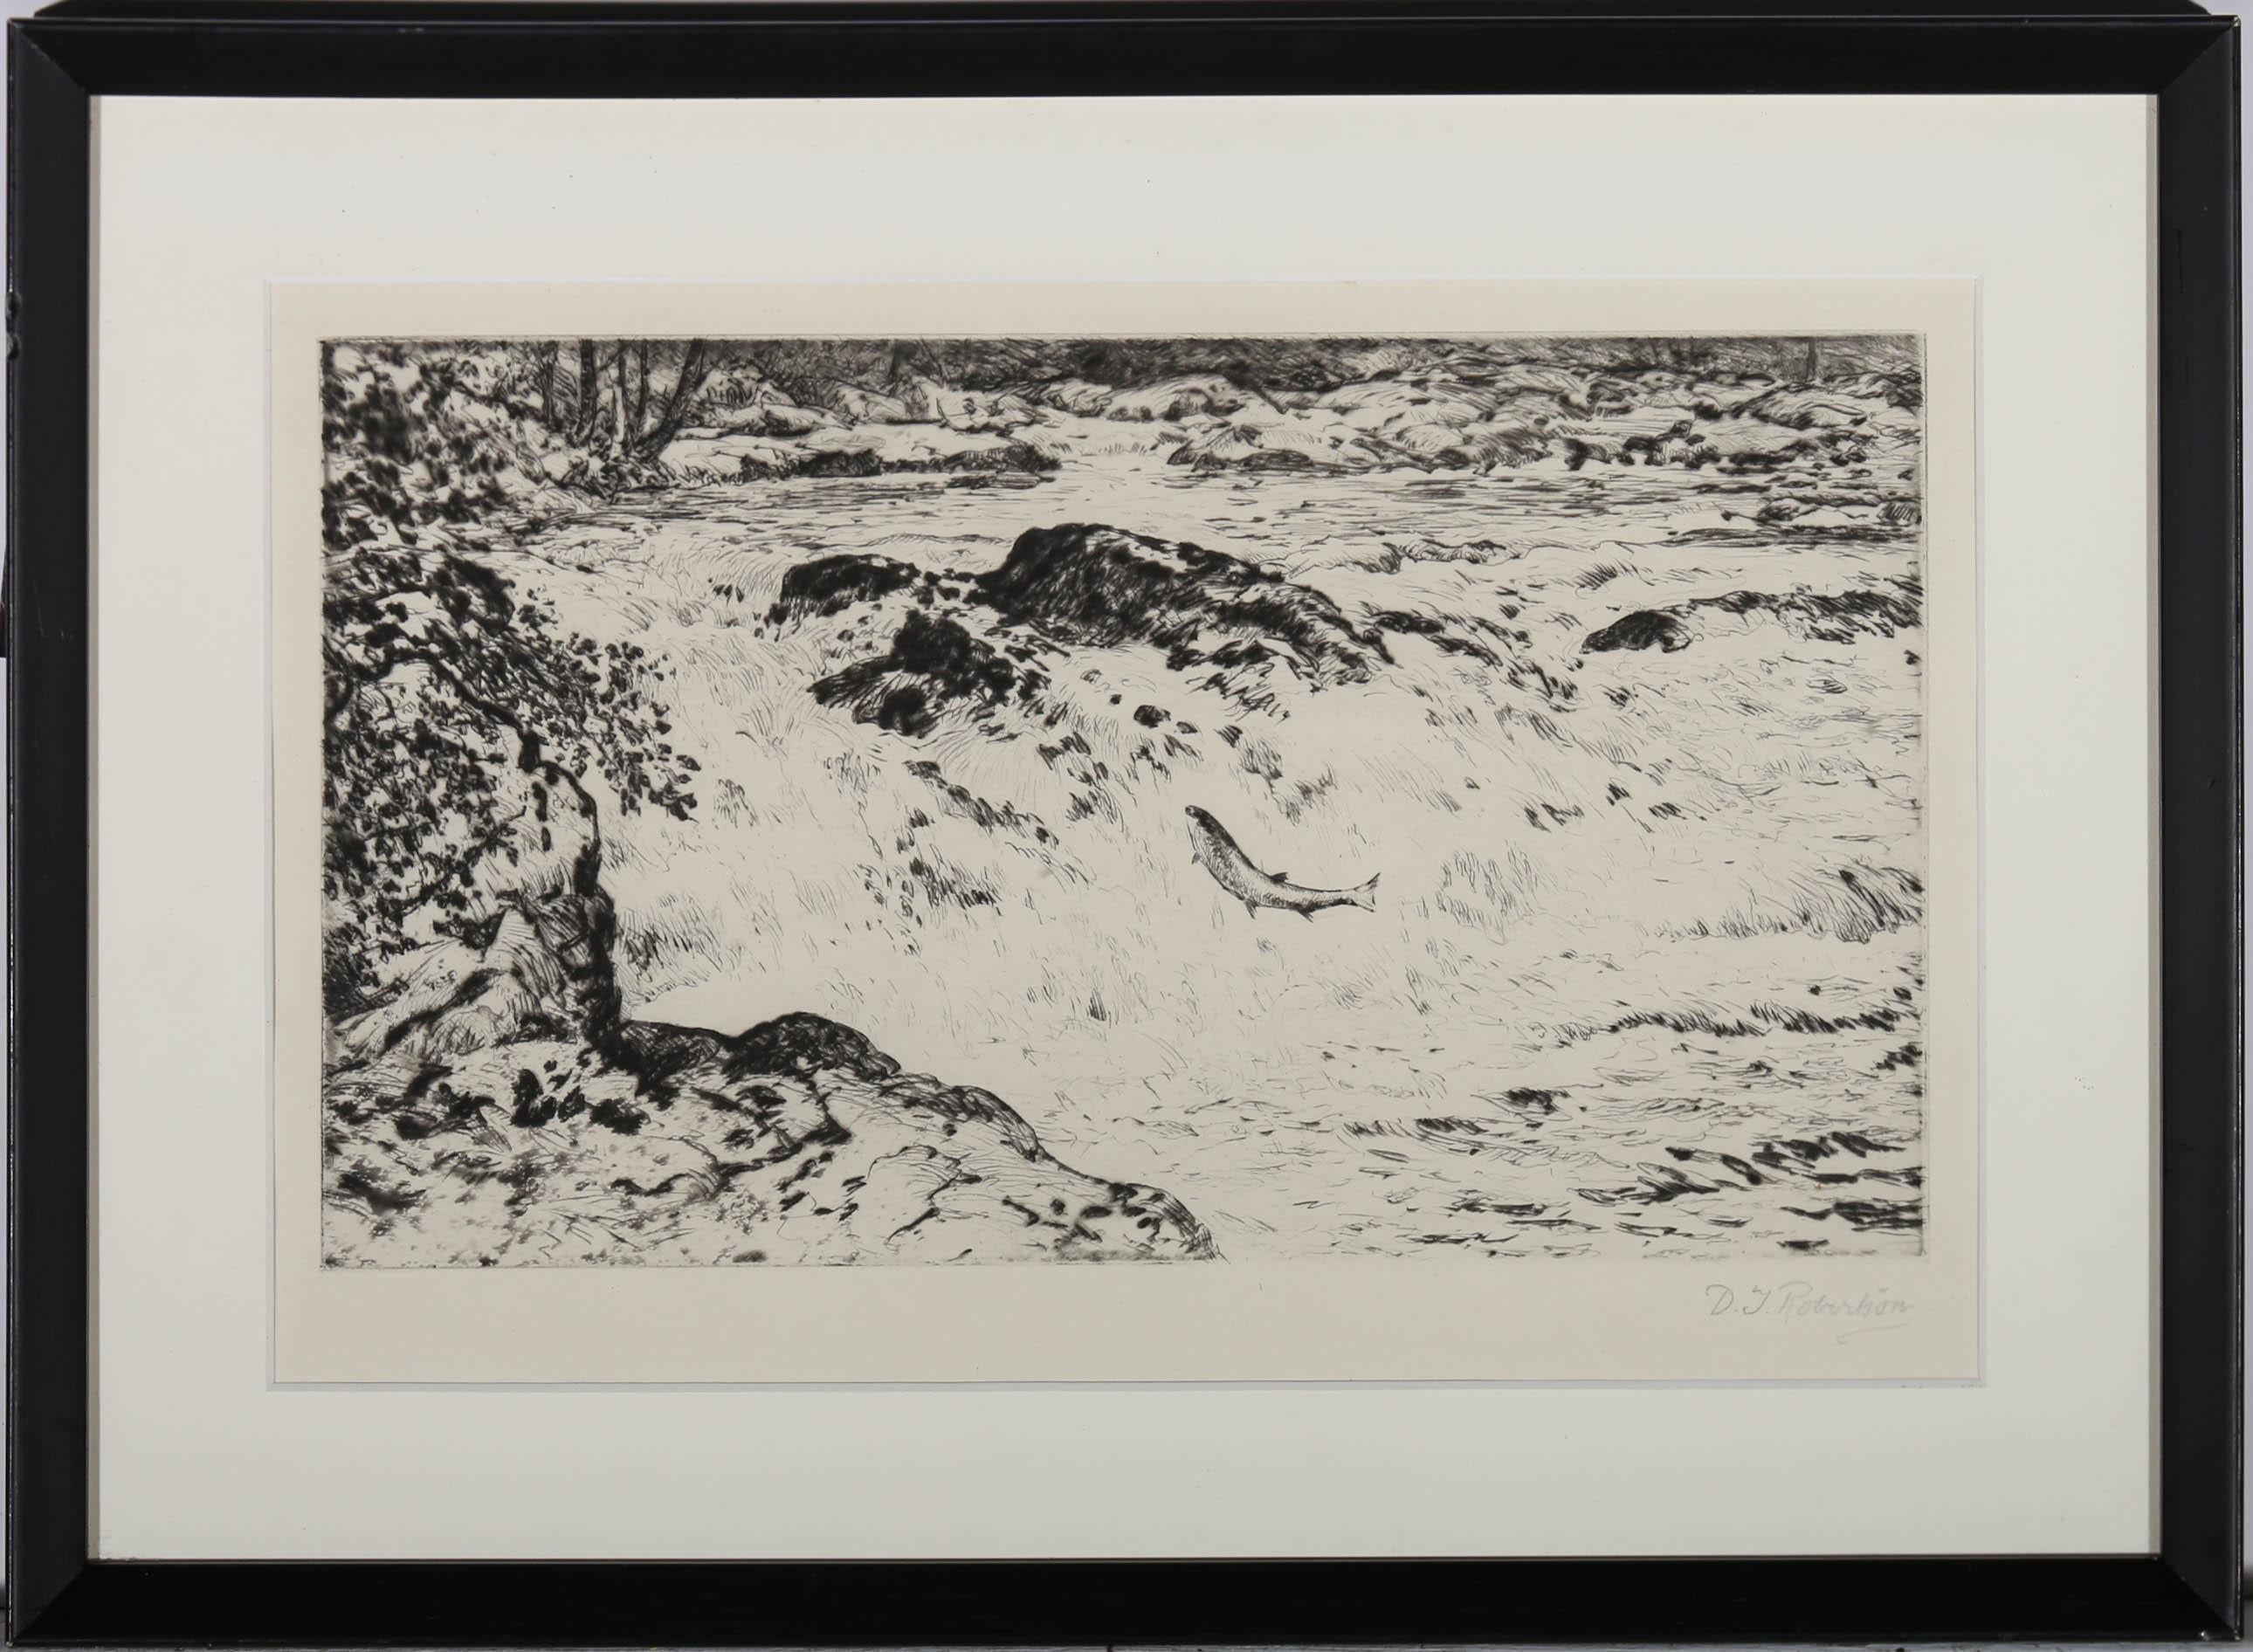 This energetic drypoint shows a salmon taking an instinctive leap up a rapid river cascade. Signed below the plate. Newly mounted in a matt black frame. On paper.
